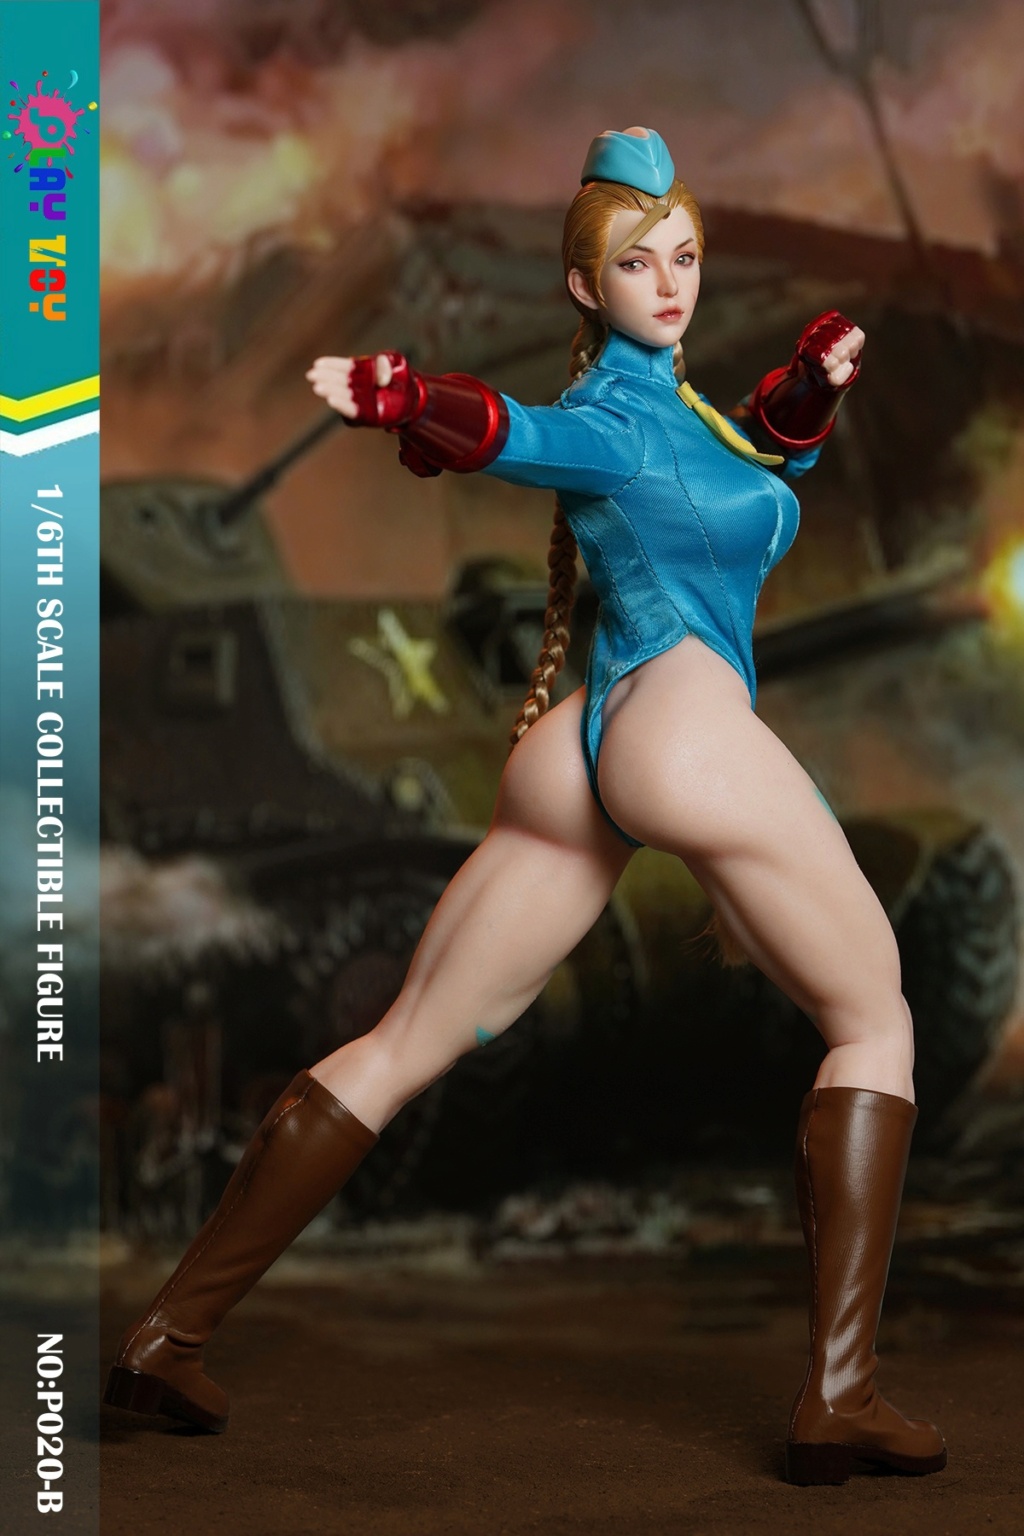 Videogame-based - NEW PRODUCT: Play Toy: P020 1/6 Scale Female Fighter in 2 styles 11442511